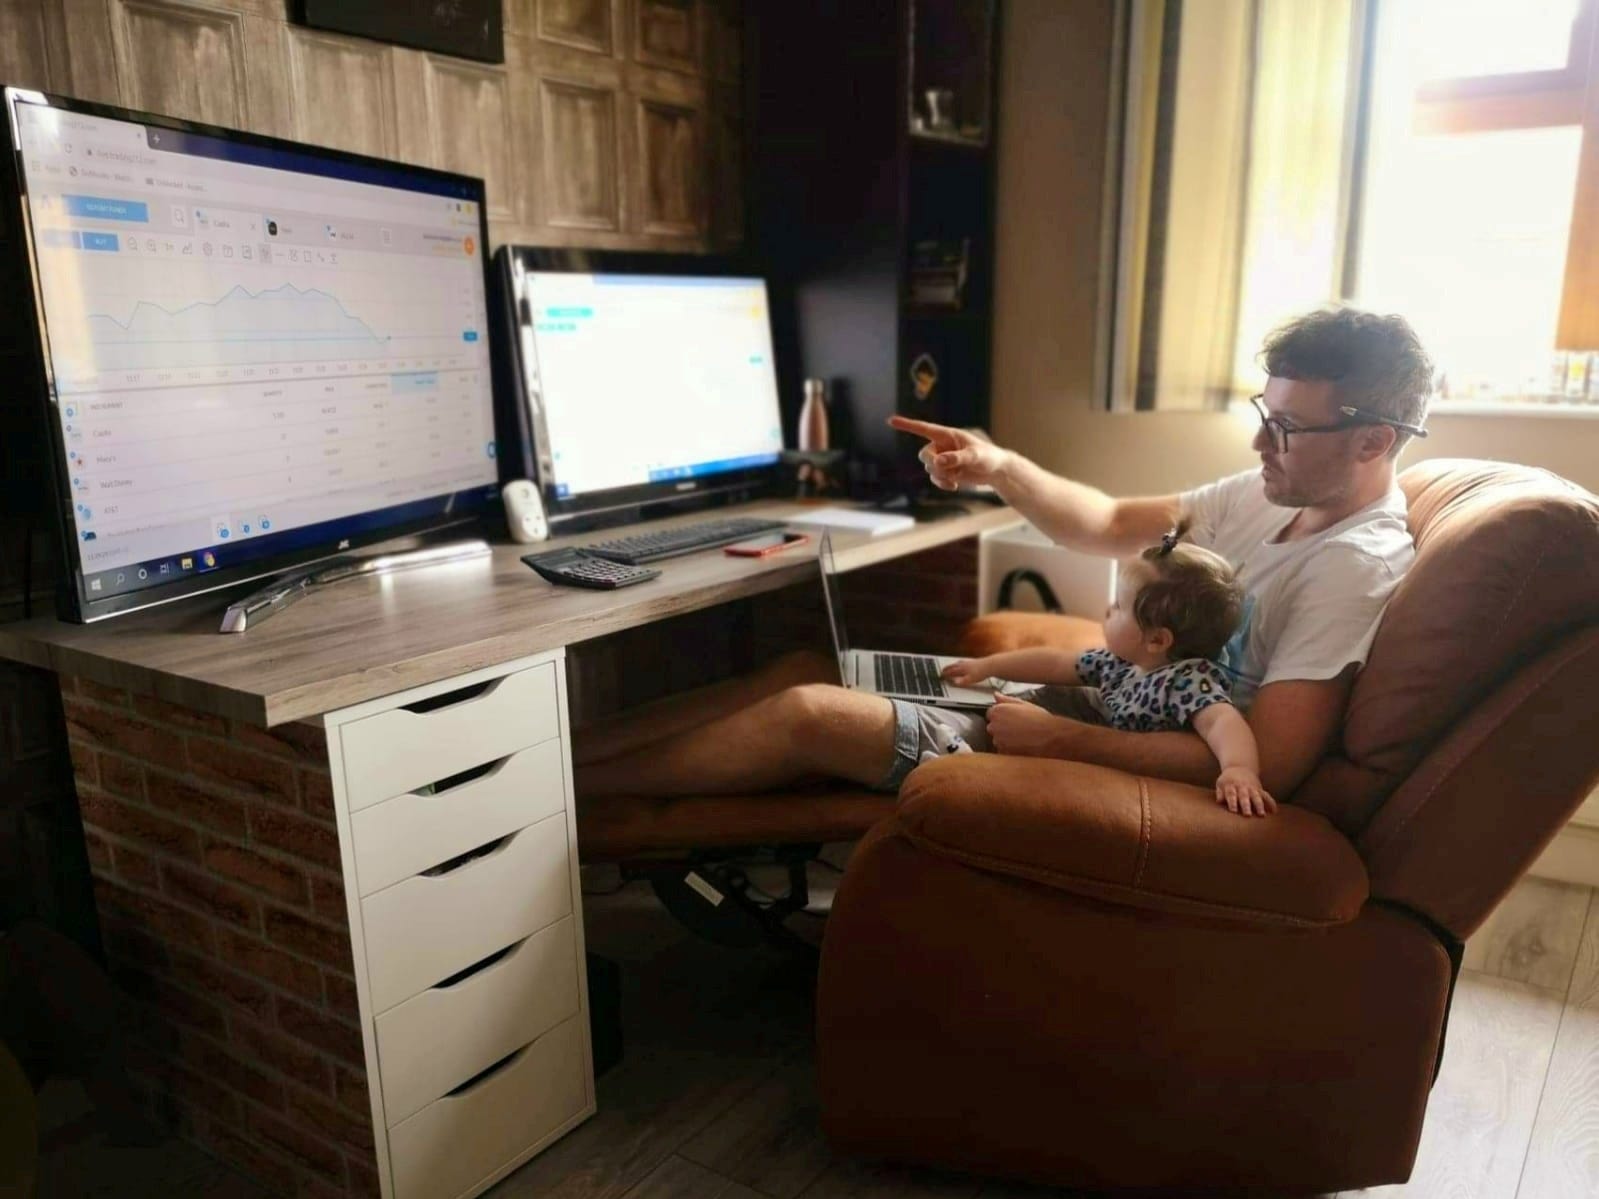 Daytrader Damian McVeigh sits in front of computers with his daughter Avril at home during the coronavirus disease (COVID-19) outbreak, in Belfast, Northern Ireland June 16, 2020.